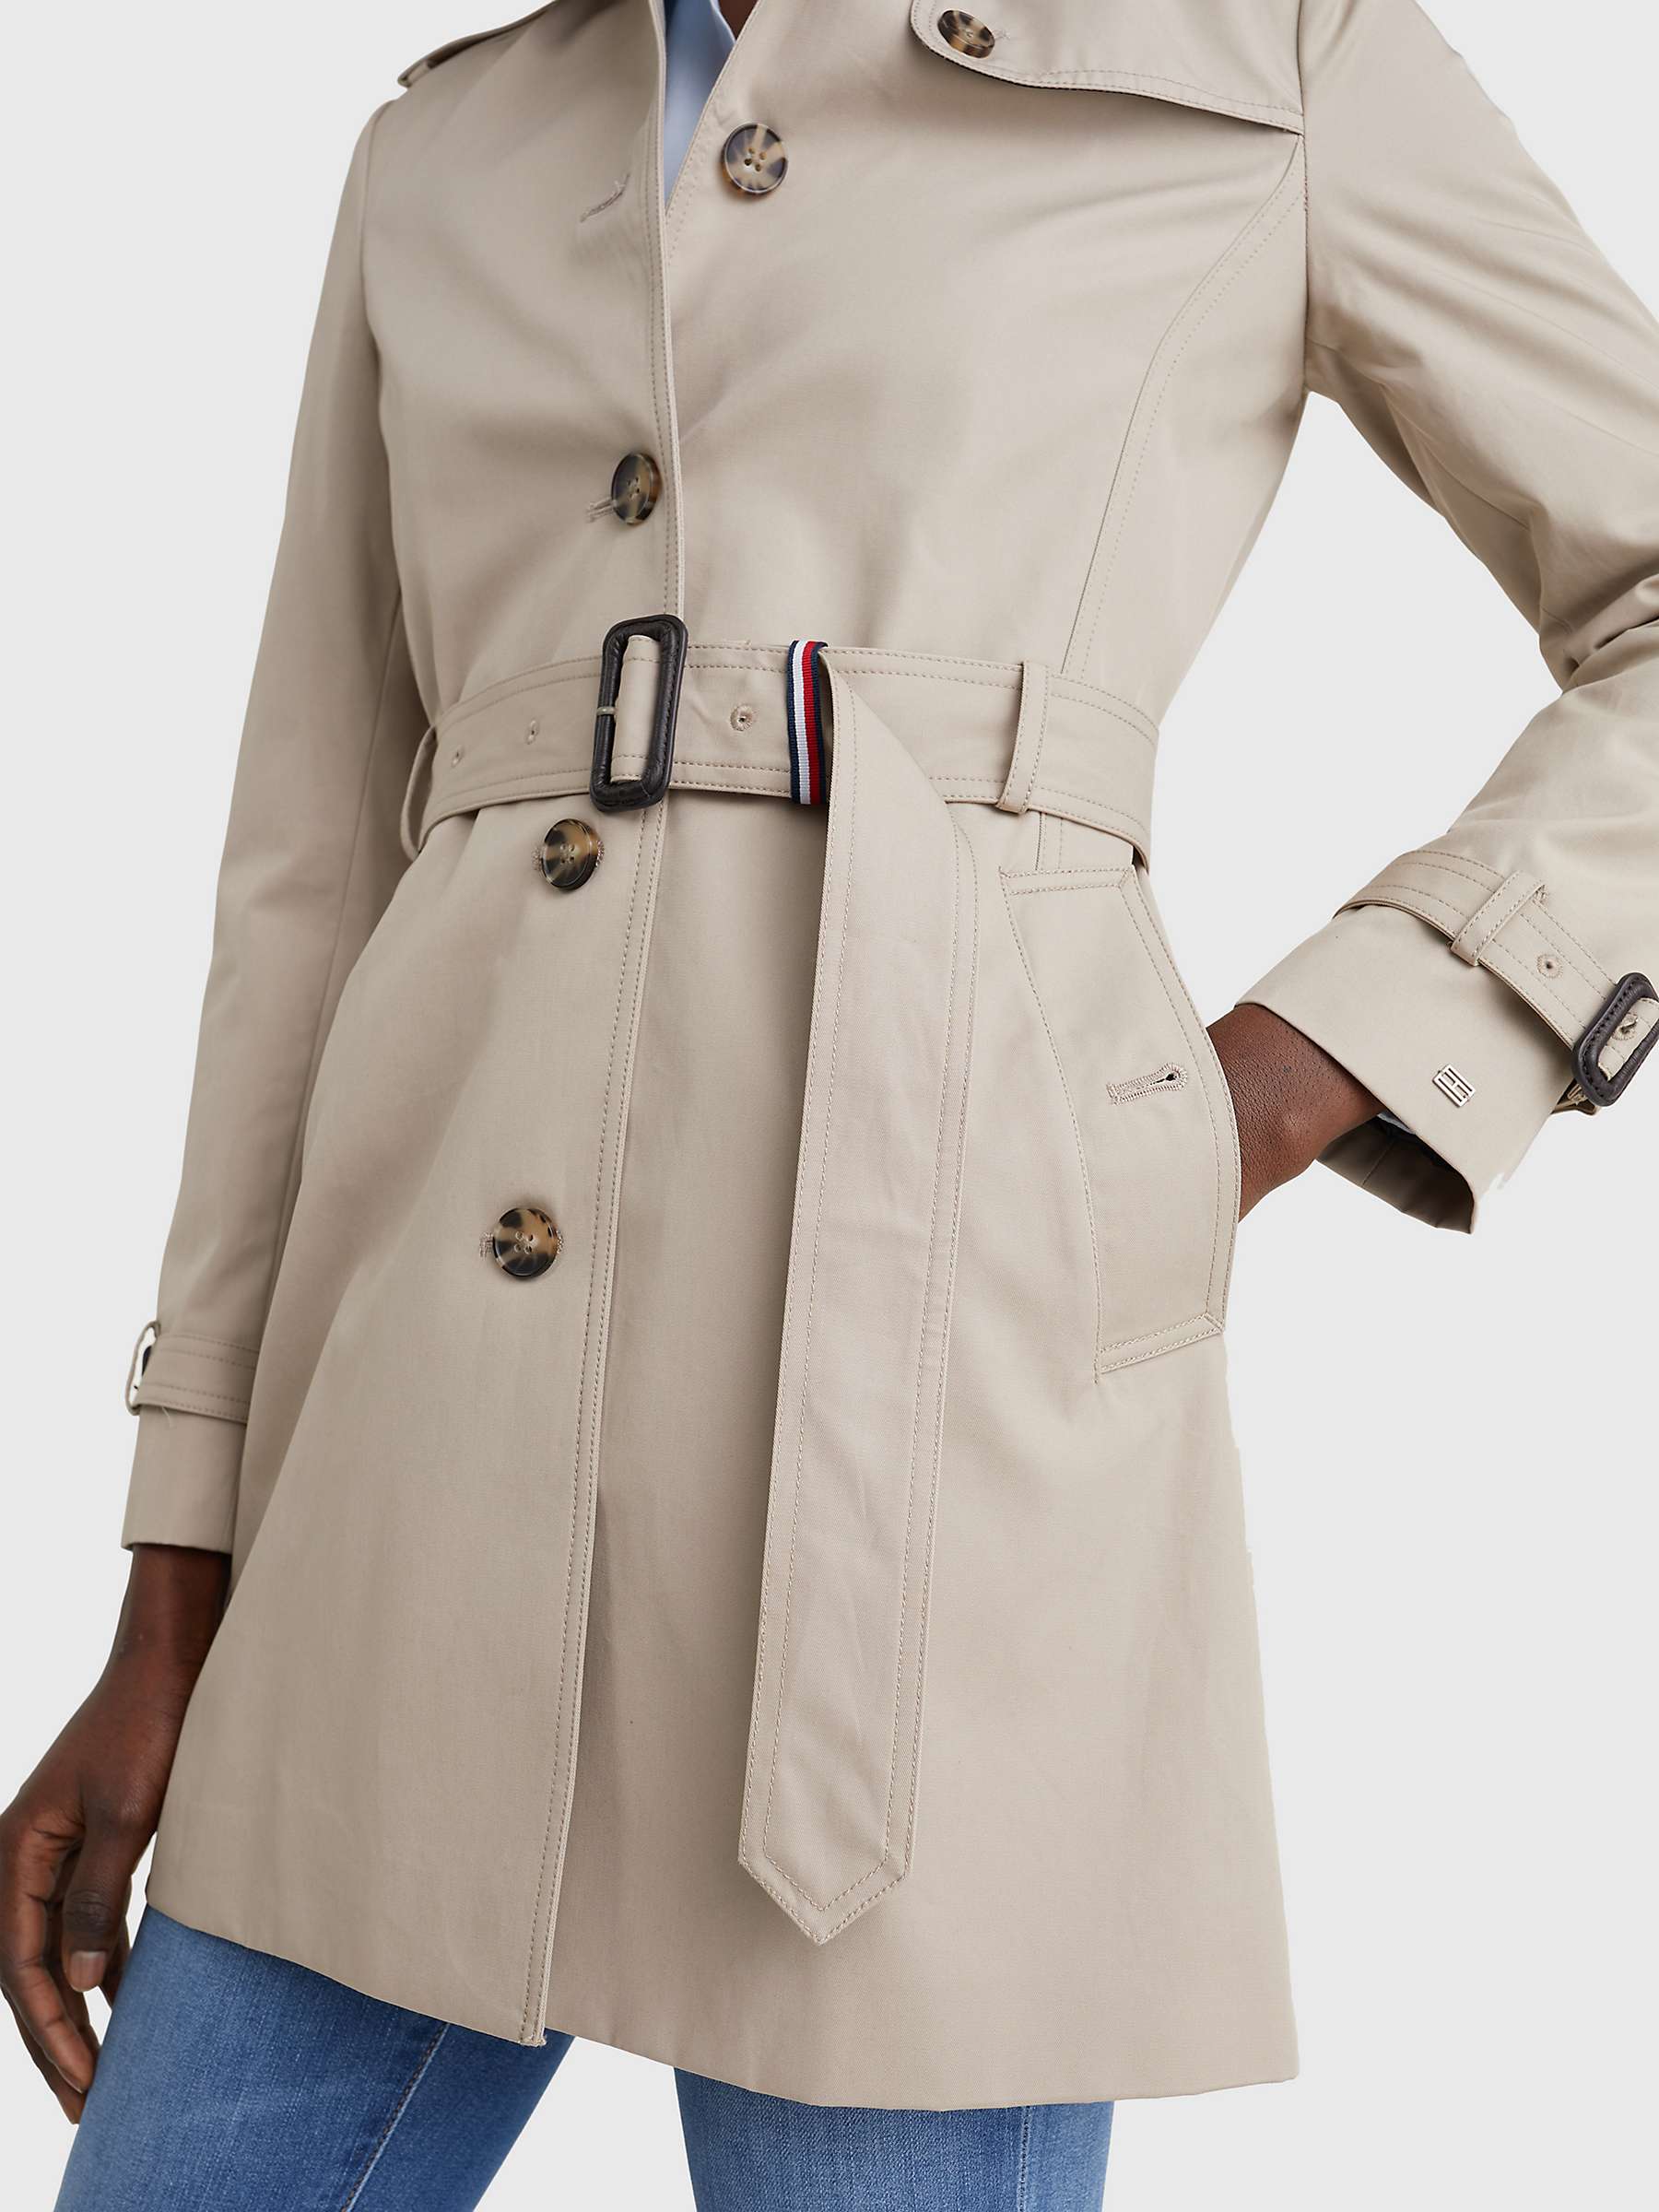 Buy Tommy Hilfiger Heritage Single Breasted Trench Coat Online at johnlewis.com